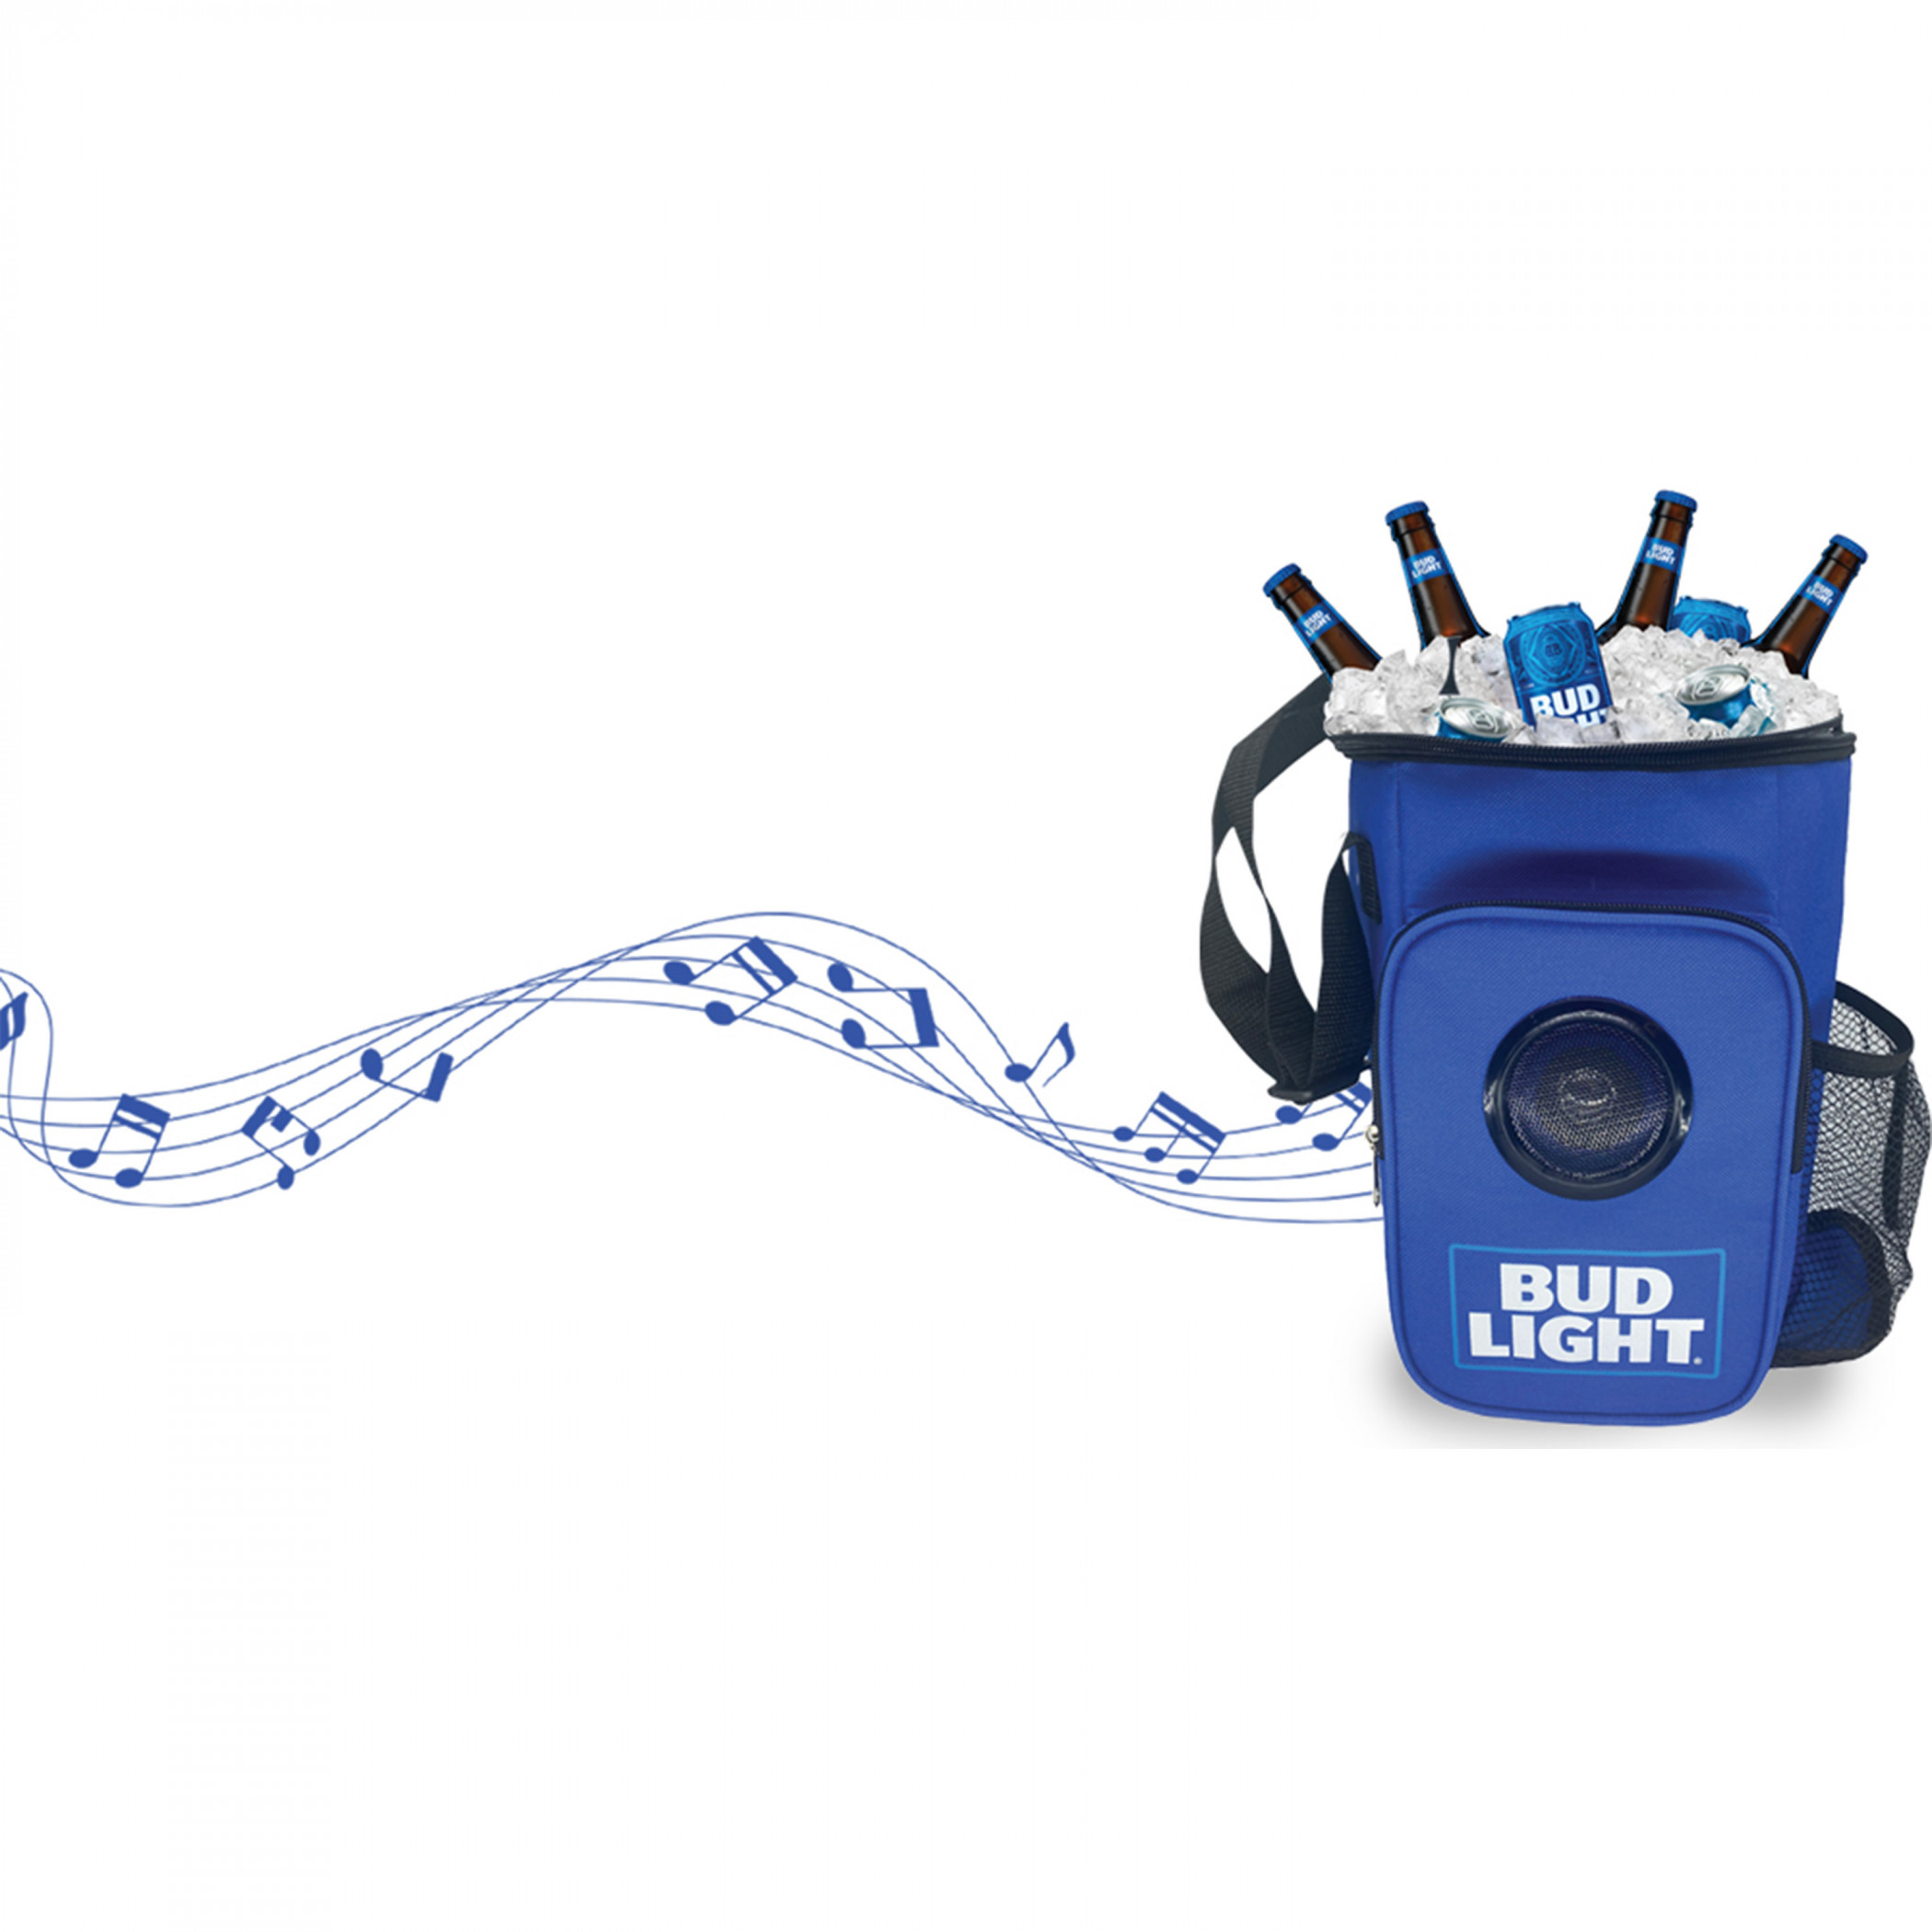 Bud Light Small Lunch Bag Cooler with Built in Bluetooth Speaker